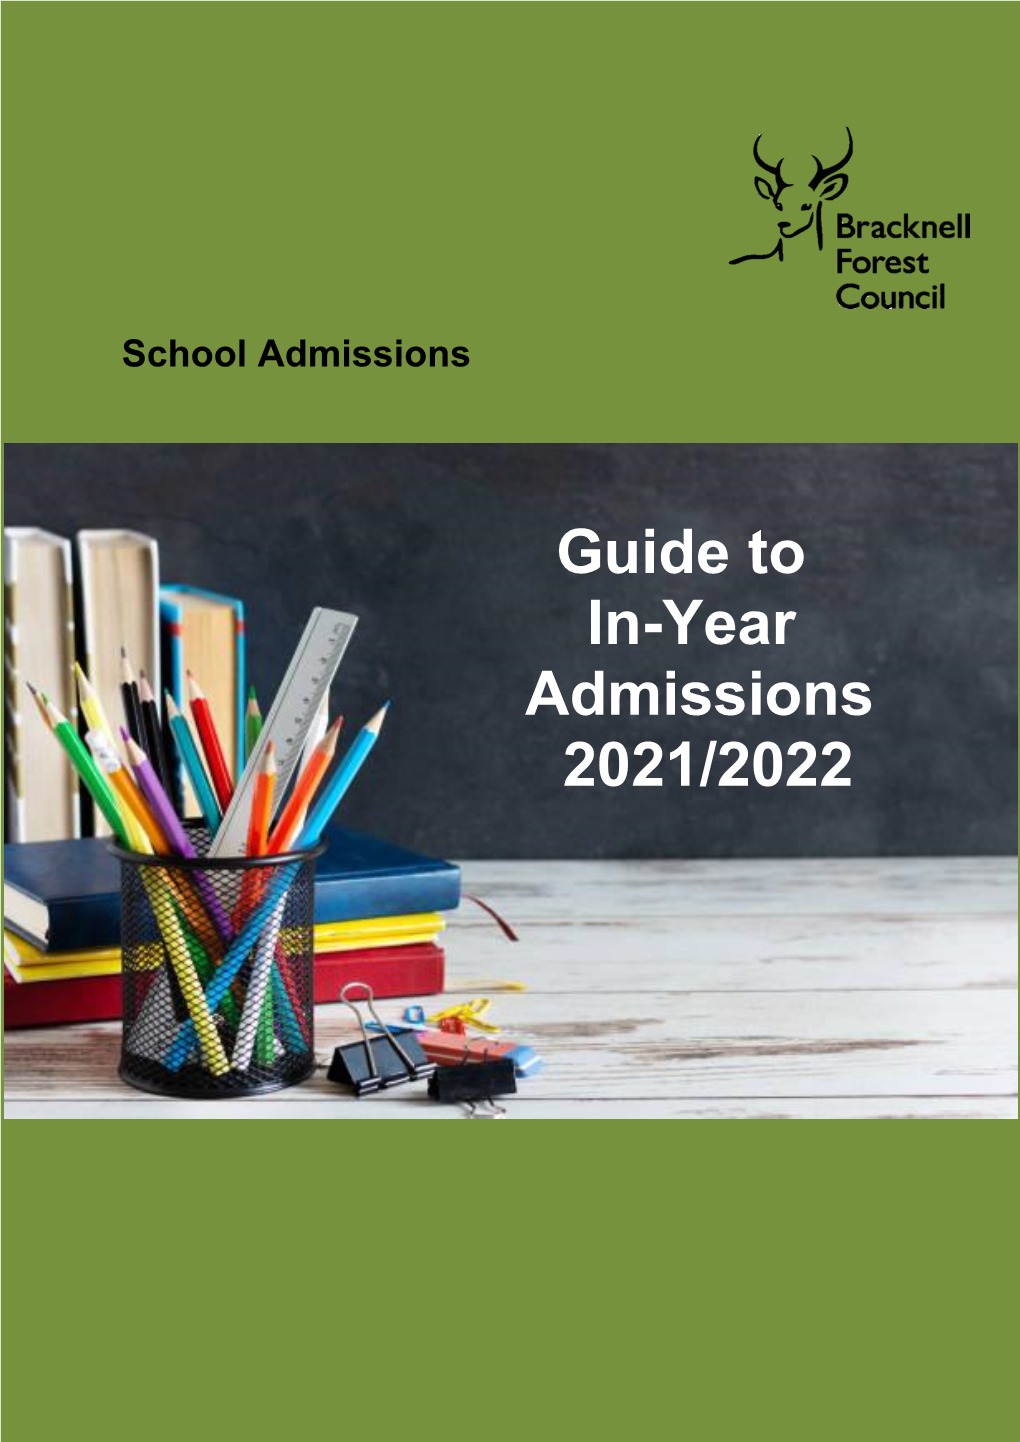 Guide to In-Year Admissions 2021 to 2022